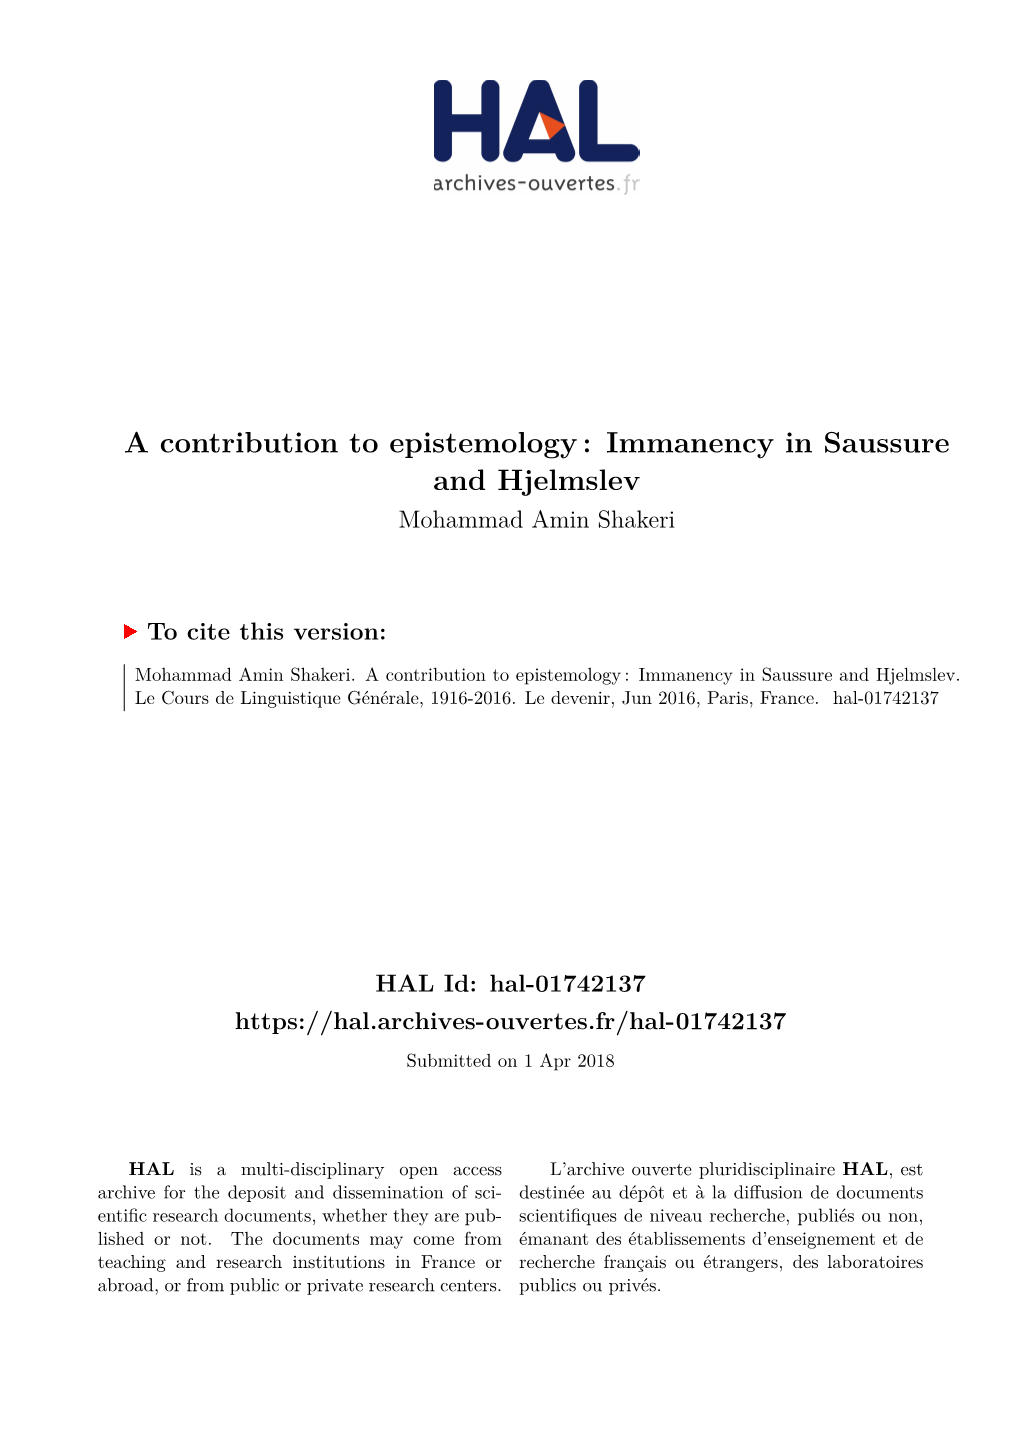 Immanency in Saussure and Hjelmslev Mohammad Amin Shakeri